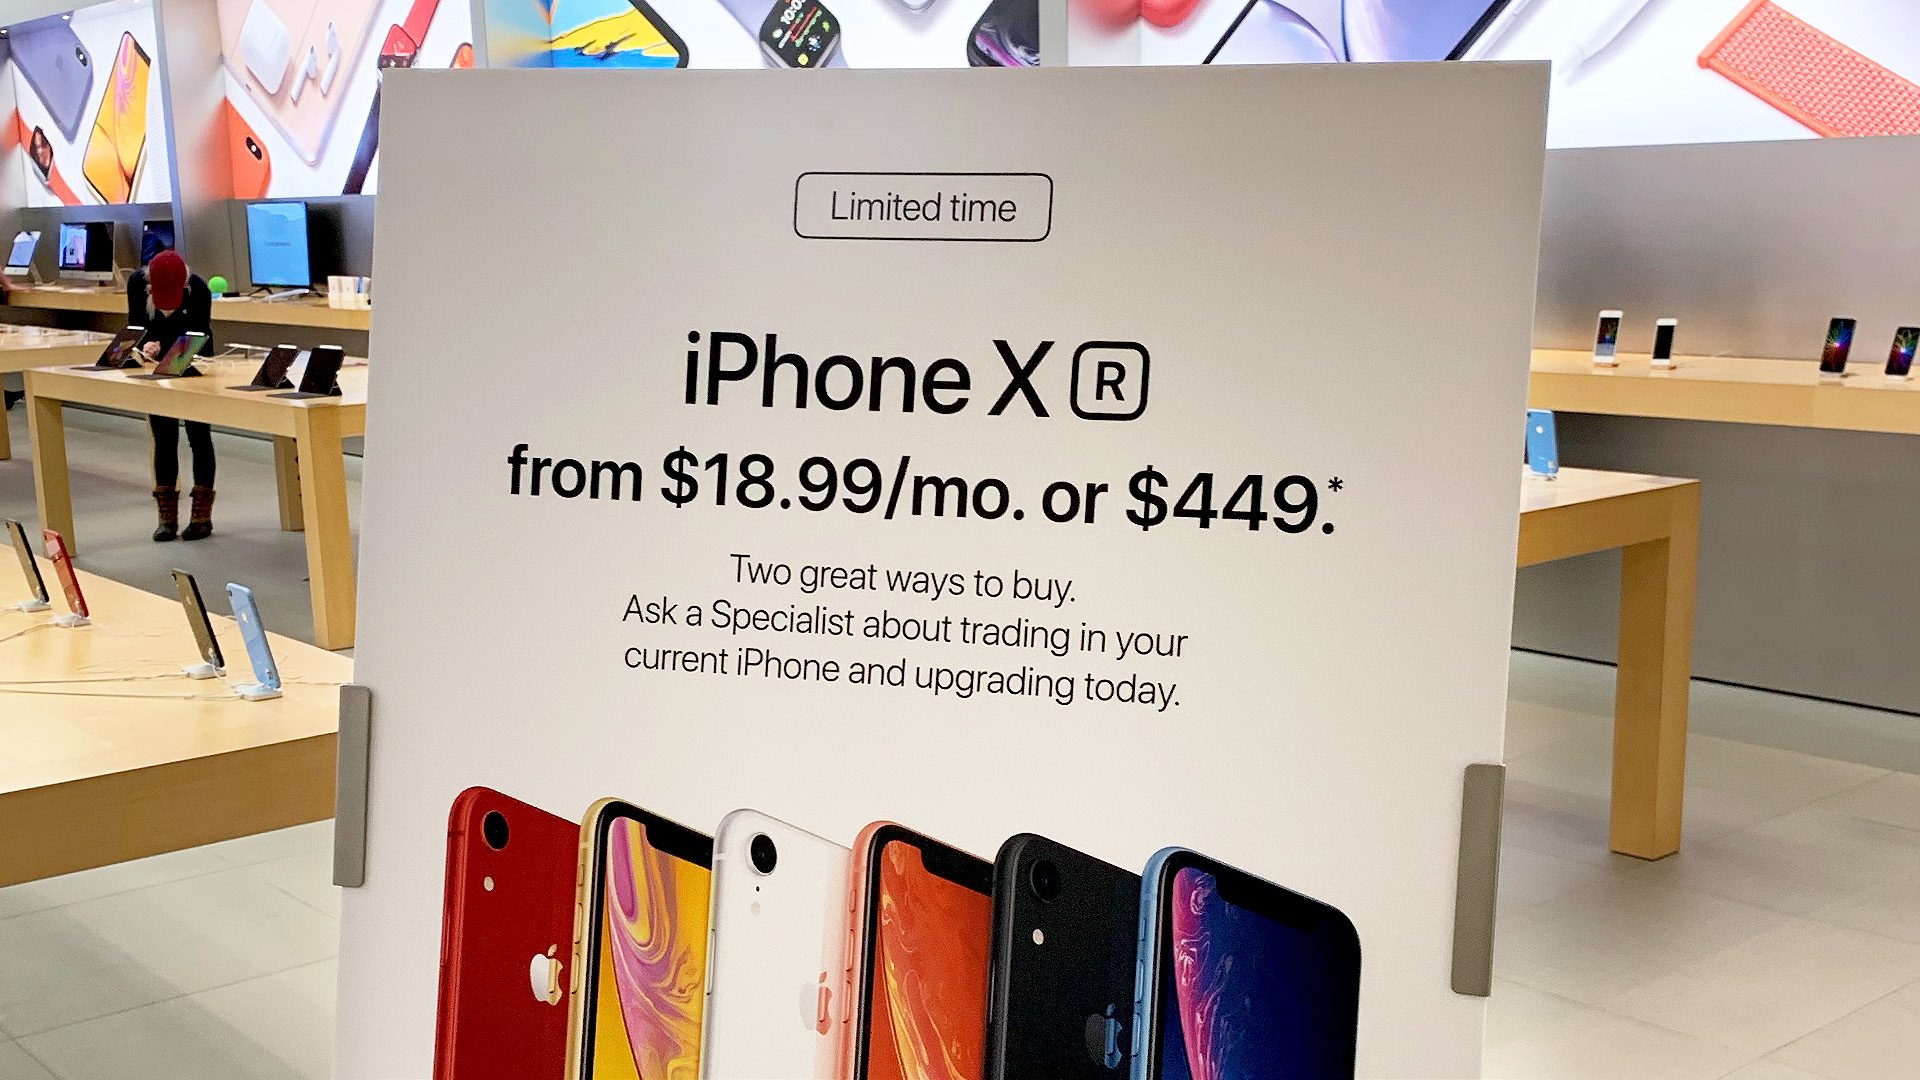  Apple Expands iPhone XR Promotion with $18.99/Month in-store Offer